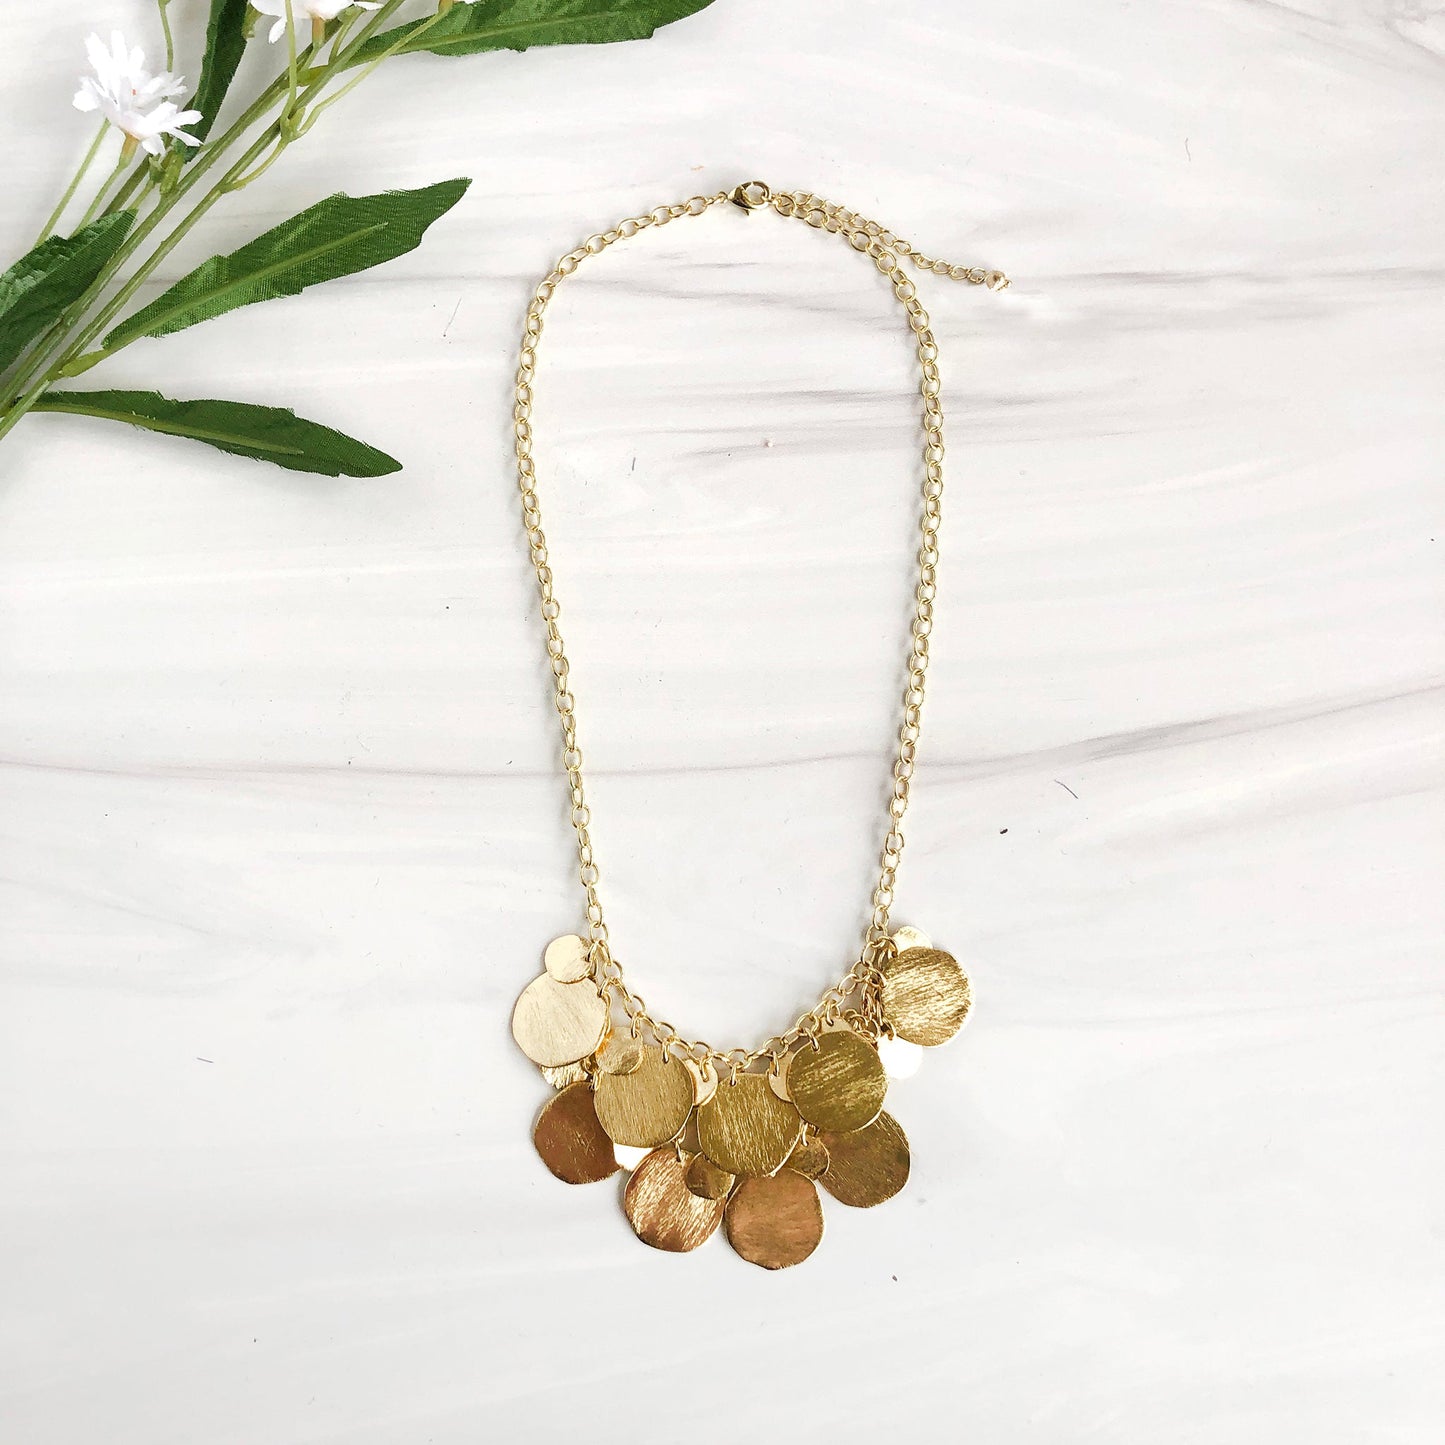 Load image into Gallery viewer, Layers of large and small handcrafted gold metal discs overlap and cascade down this glimmering pendant necklace.
